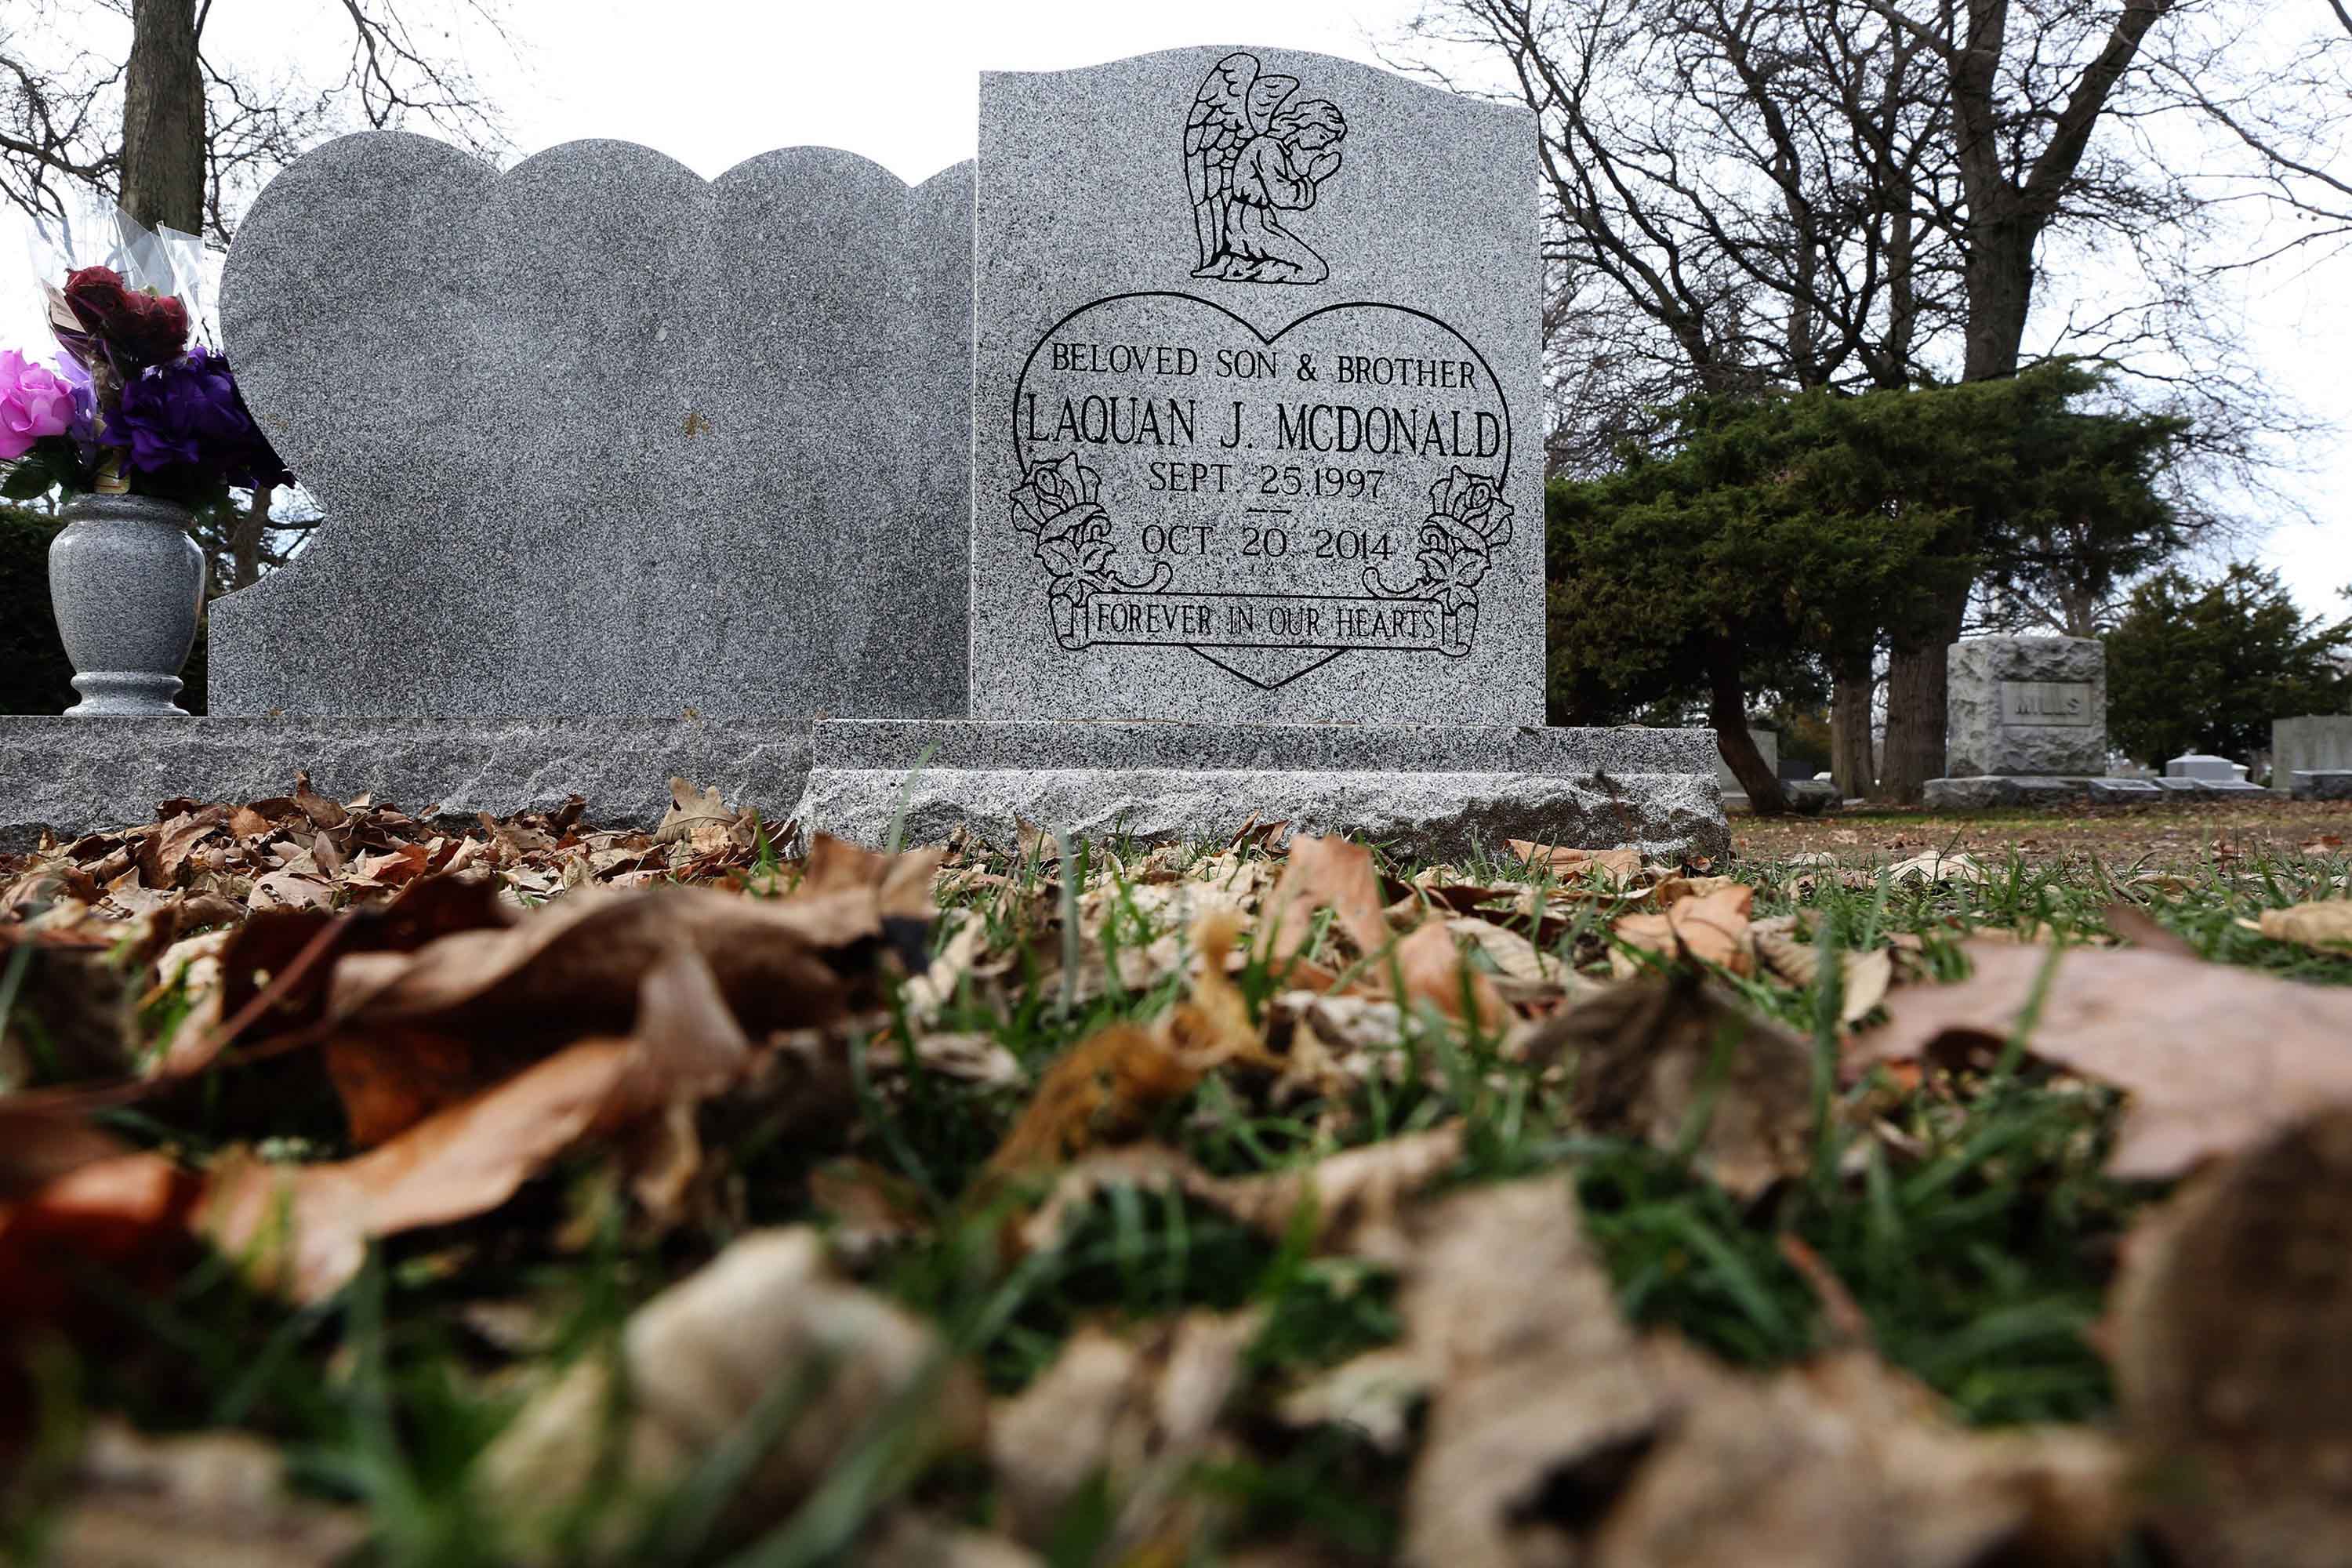 The headstone of Laquan McDonald at Forest Home Cemetery on Thursday, Dec. 10, 2015 in Forest Park, Ill. (Antonio Perez/Chicago Tribune/TNS)